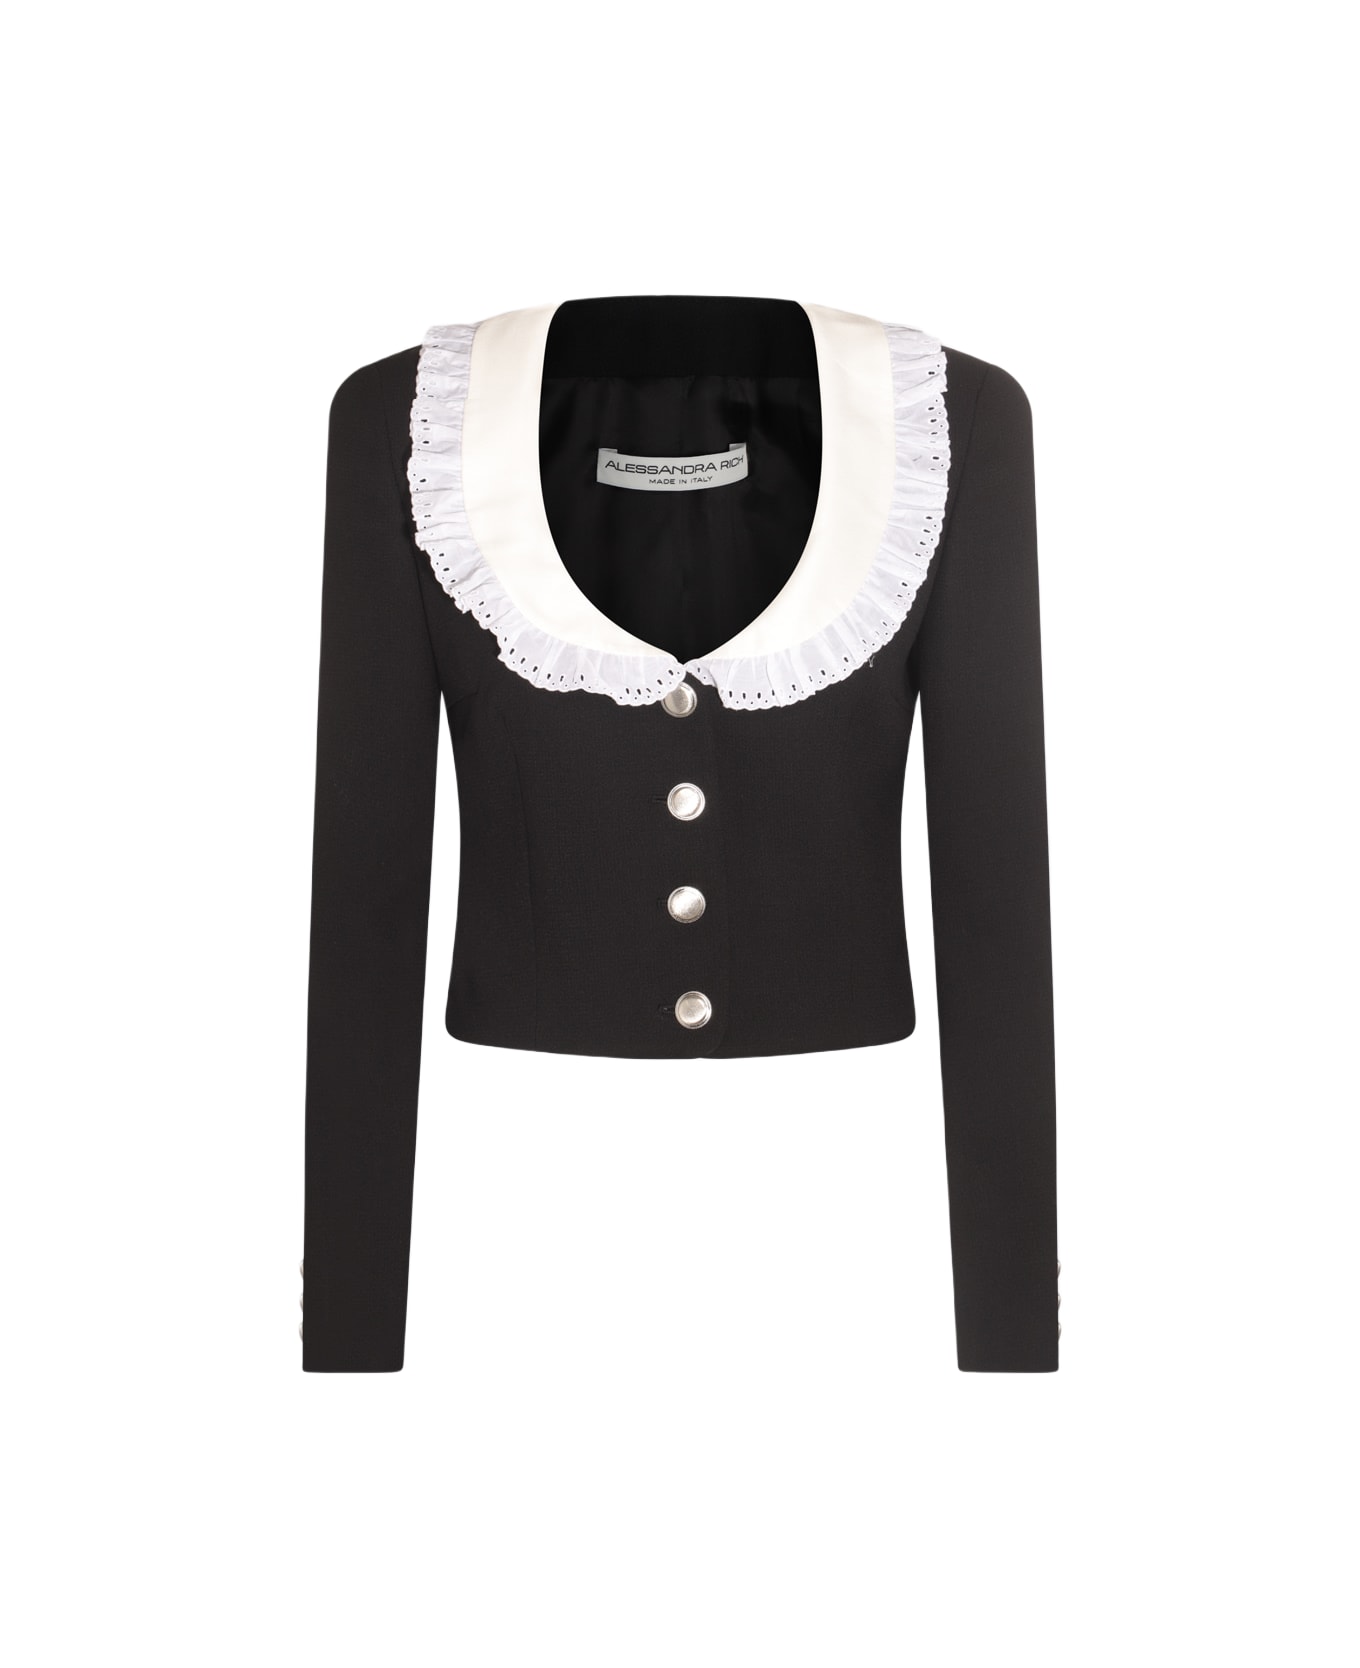 Alessandra Rich Black And White Silk-wool Blend Casual Jacket - Black カーディガン